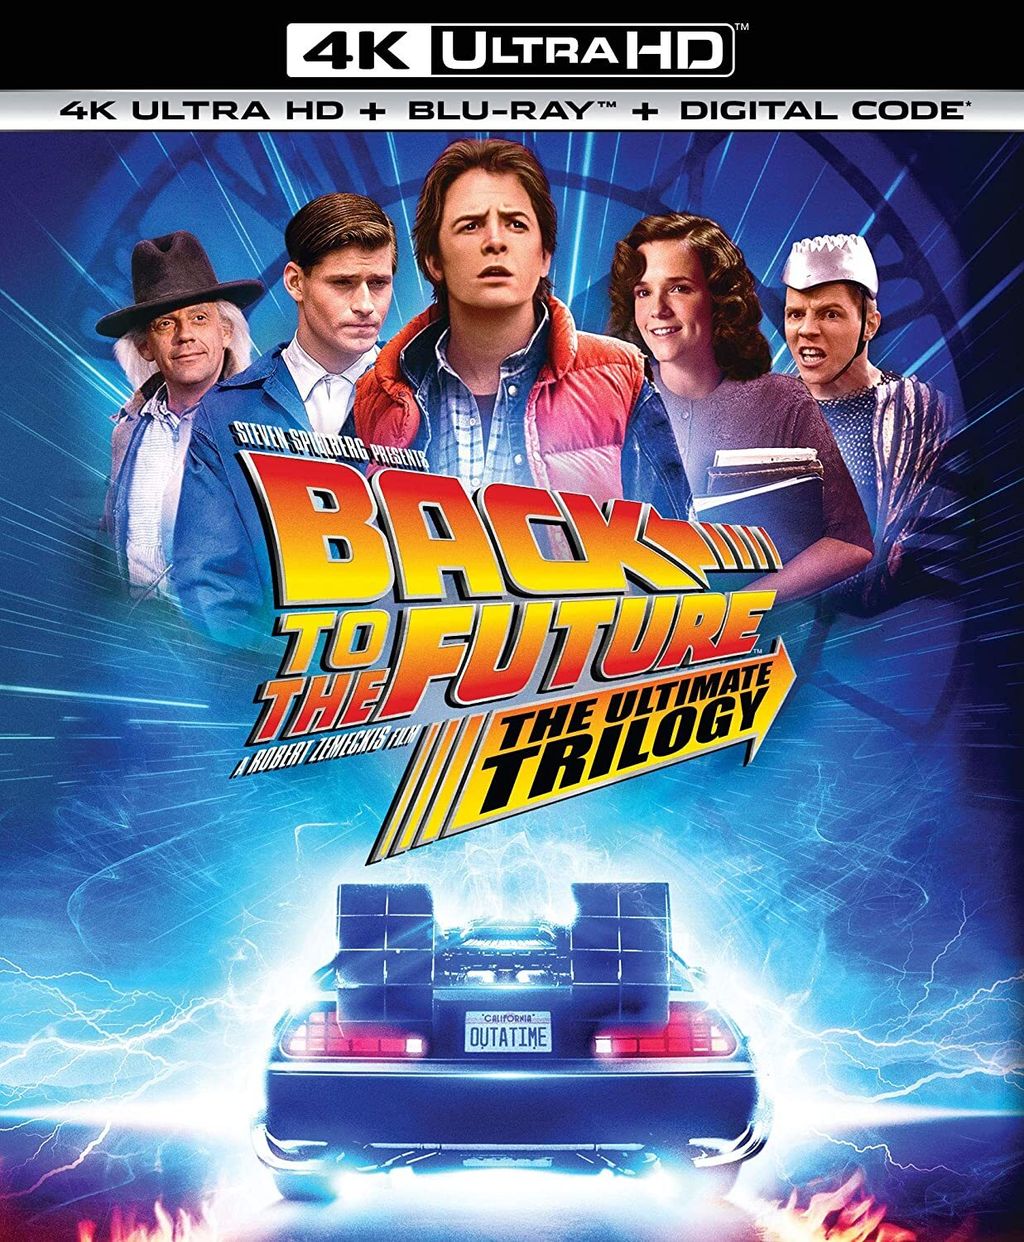 BACK TO THE FUTURE The Ultimate Trilogy 4K Collector's Edition Ultra-HD Blu-ray 7-DISCS2